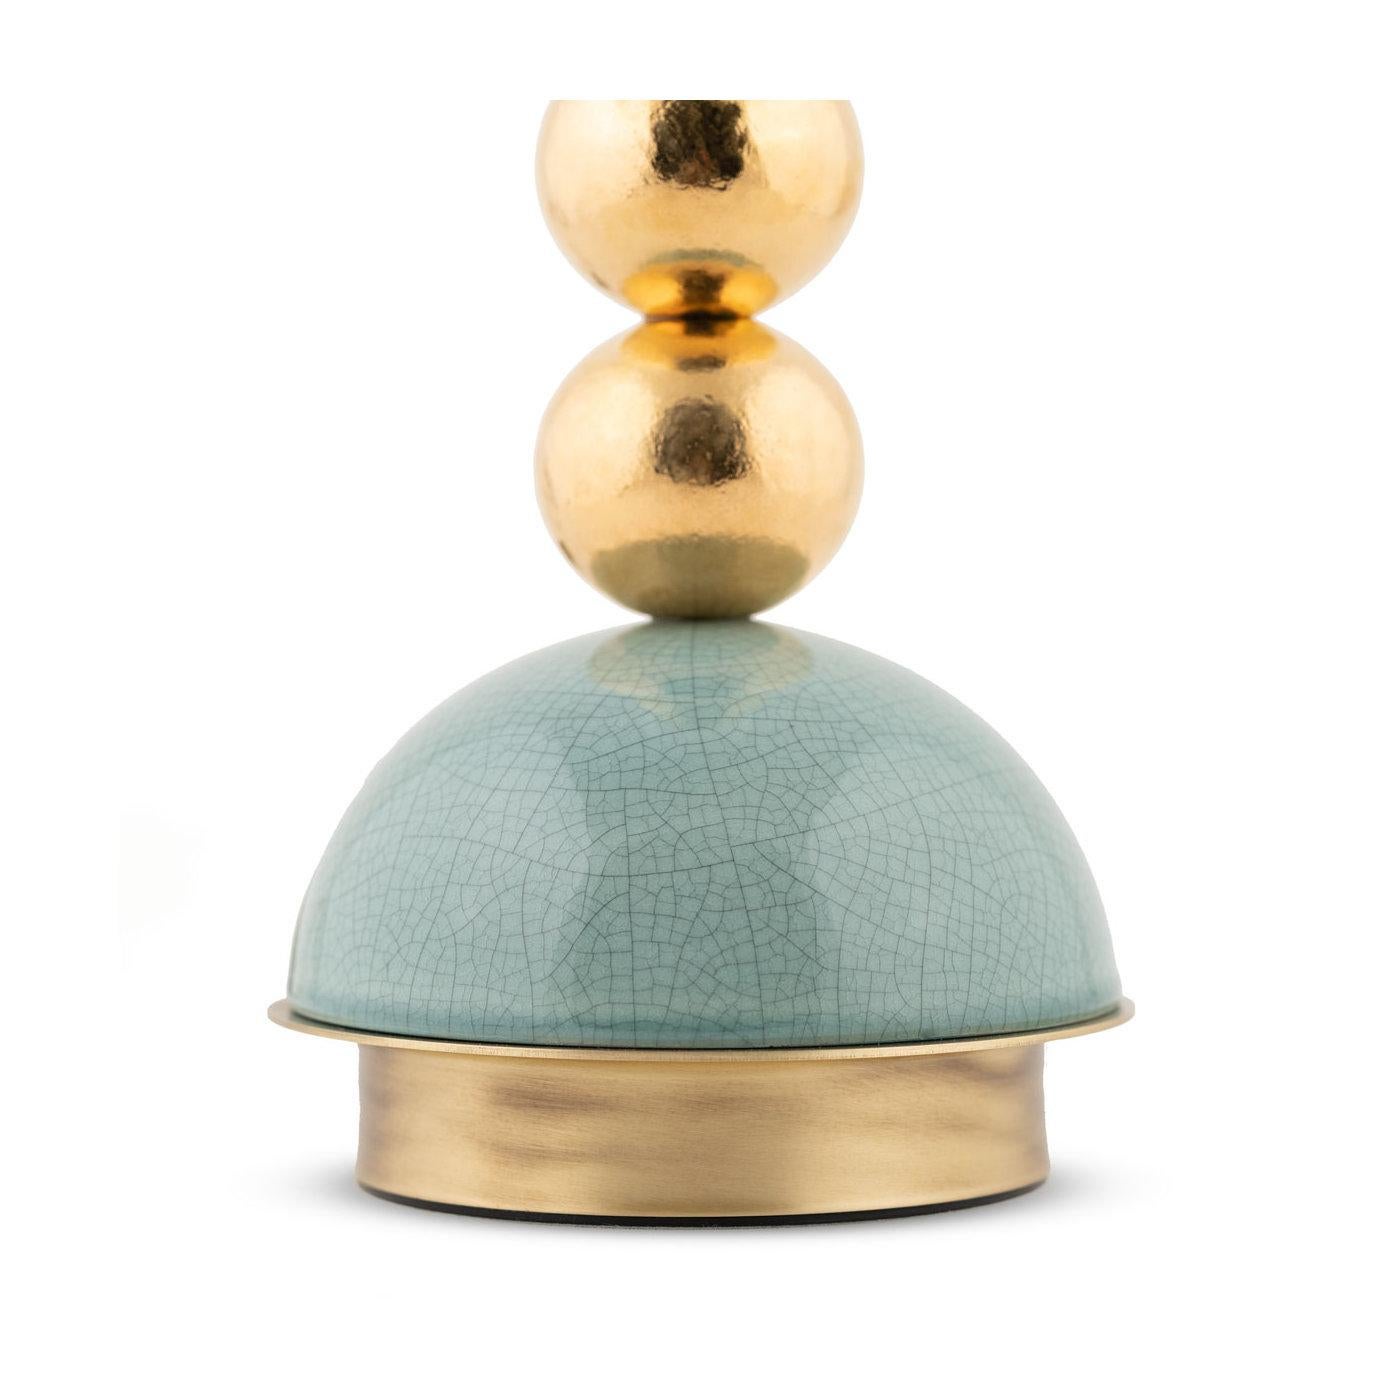 An elegant interplay of lines and volumes, this sculptural table lamp will make a stylish addition to any modern decor. The piece is composed of four, golden-hued ceramic spheres composing the main body, all resting on a turquoise-glazed ceramic